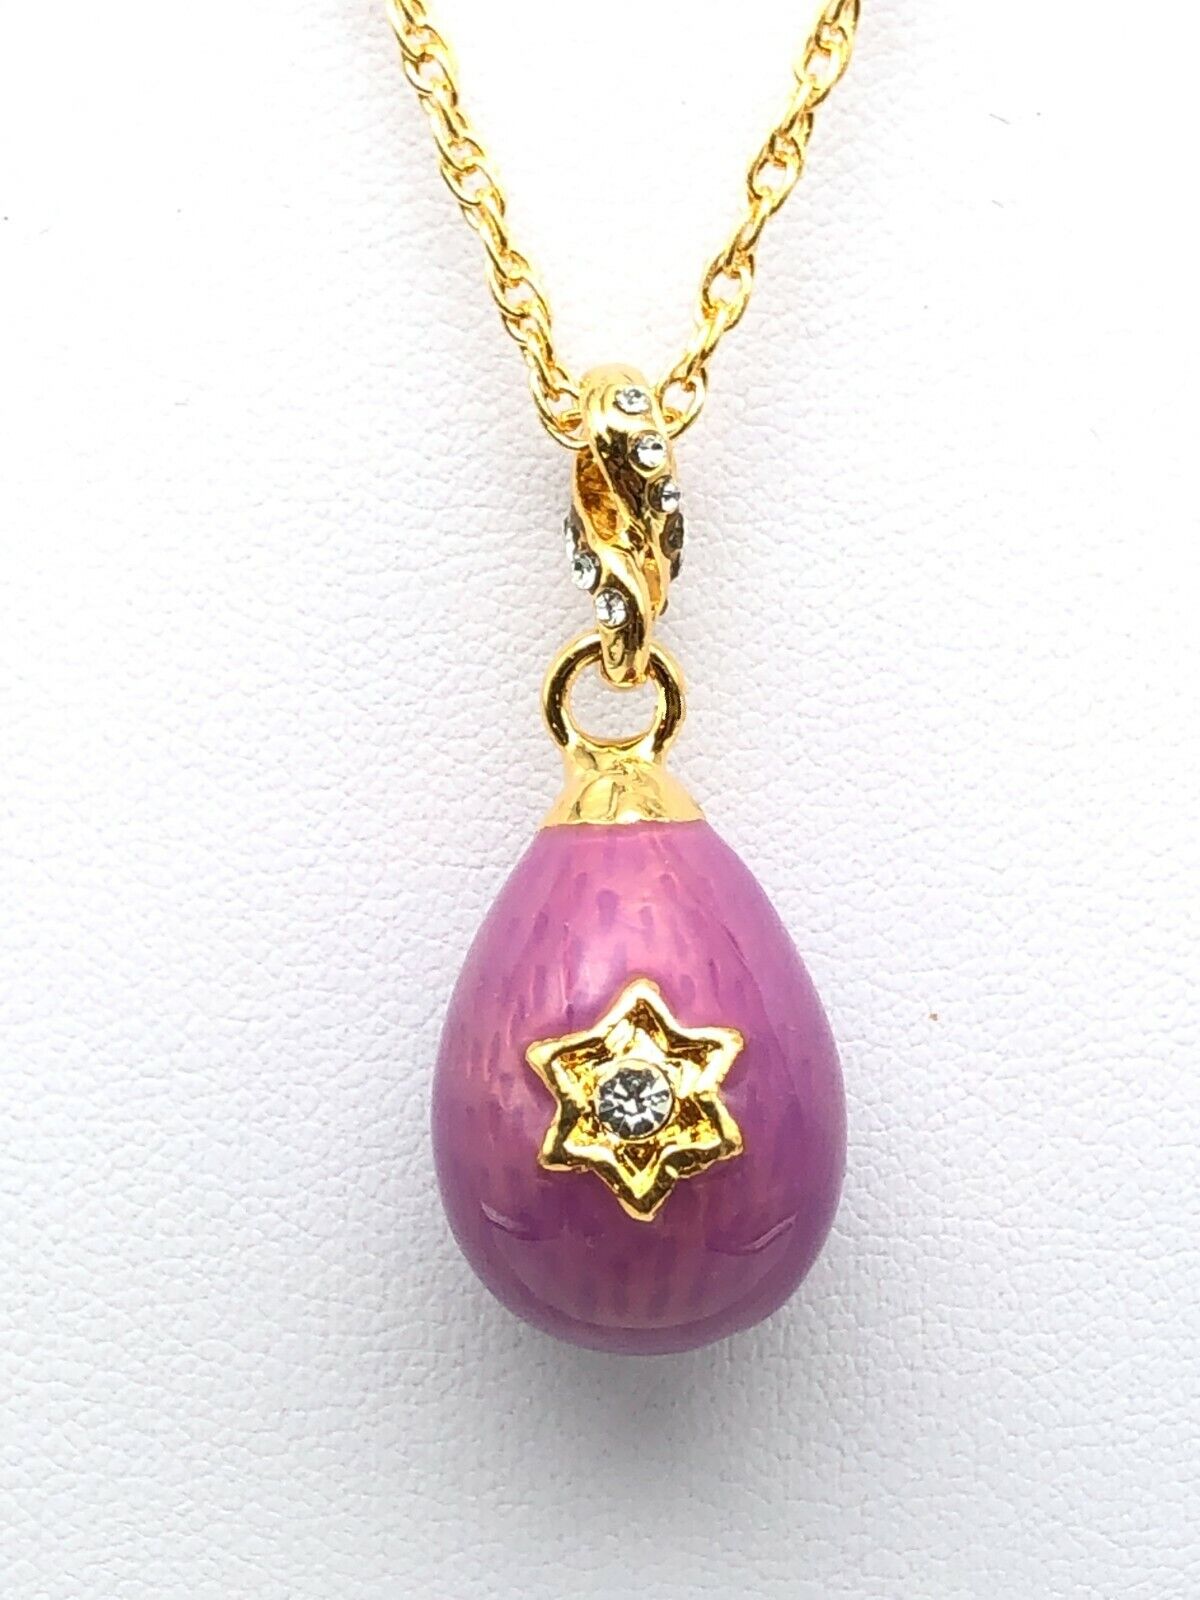 Purple Egg Pendant Necklace with crystals by Keren Kopal